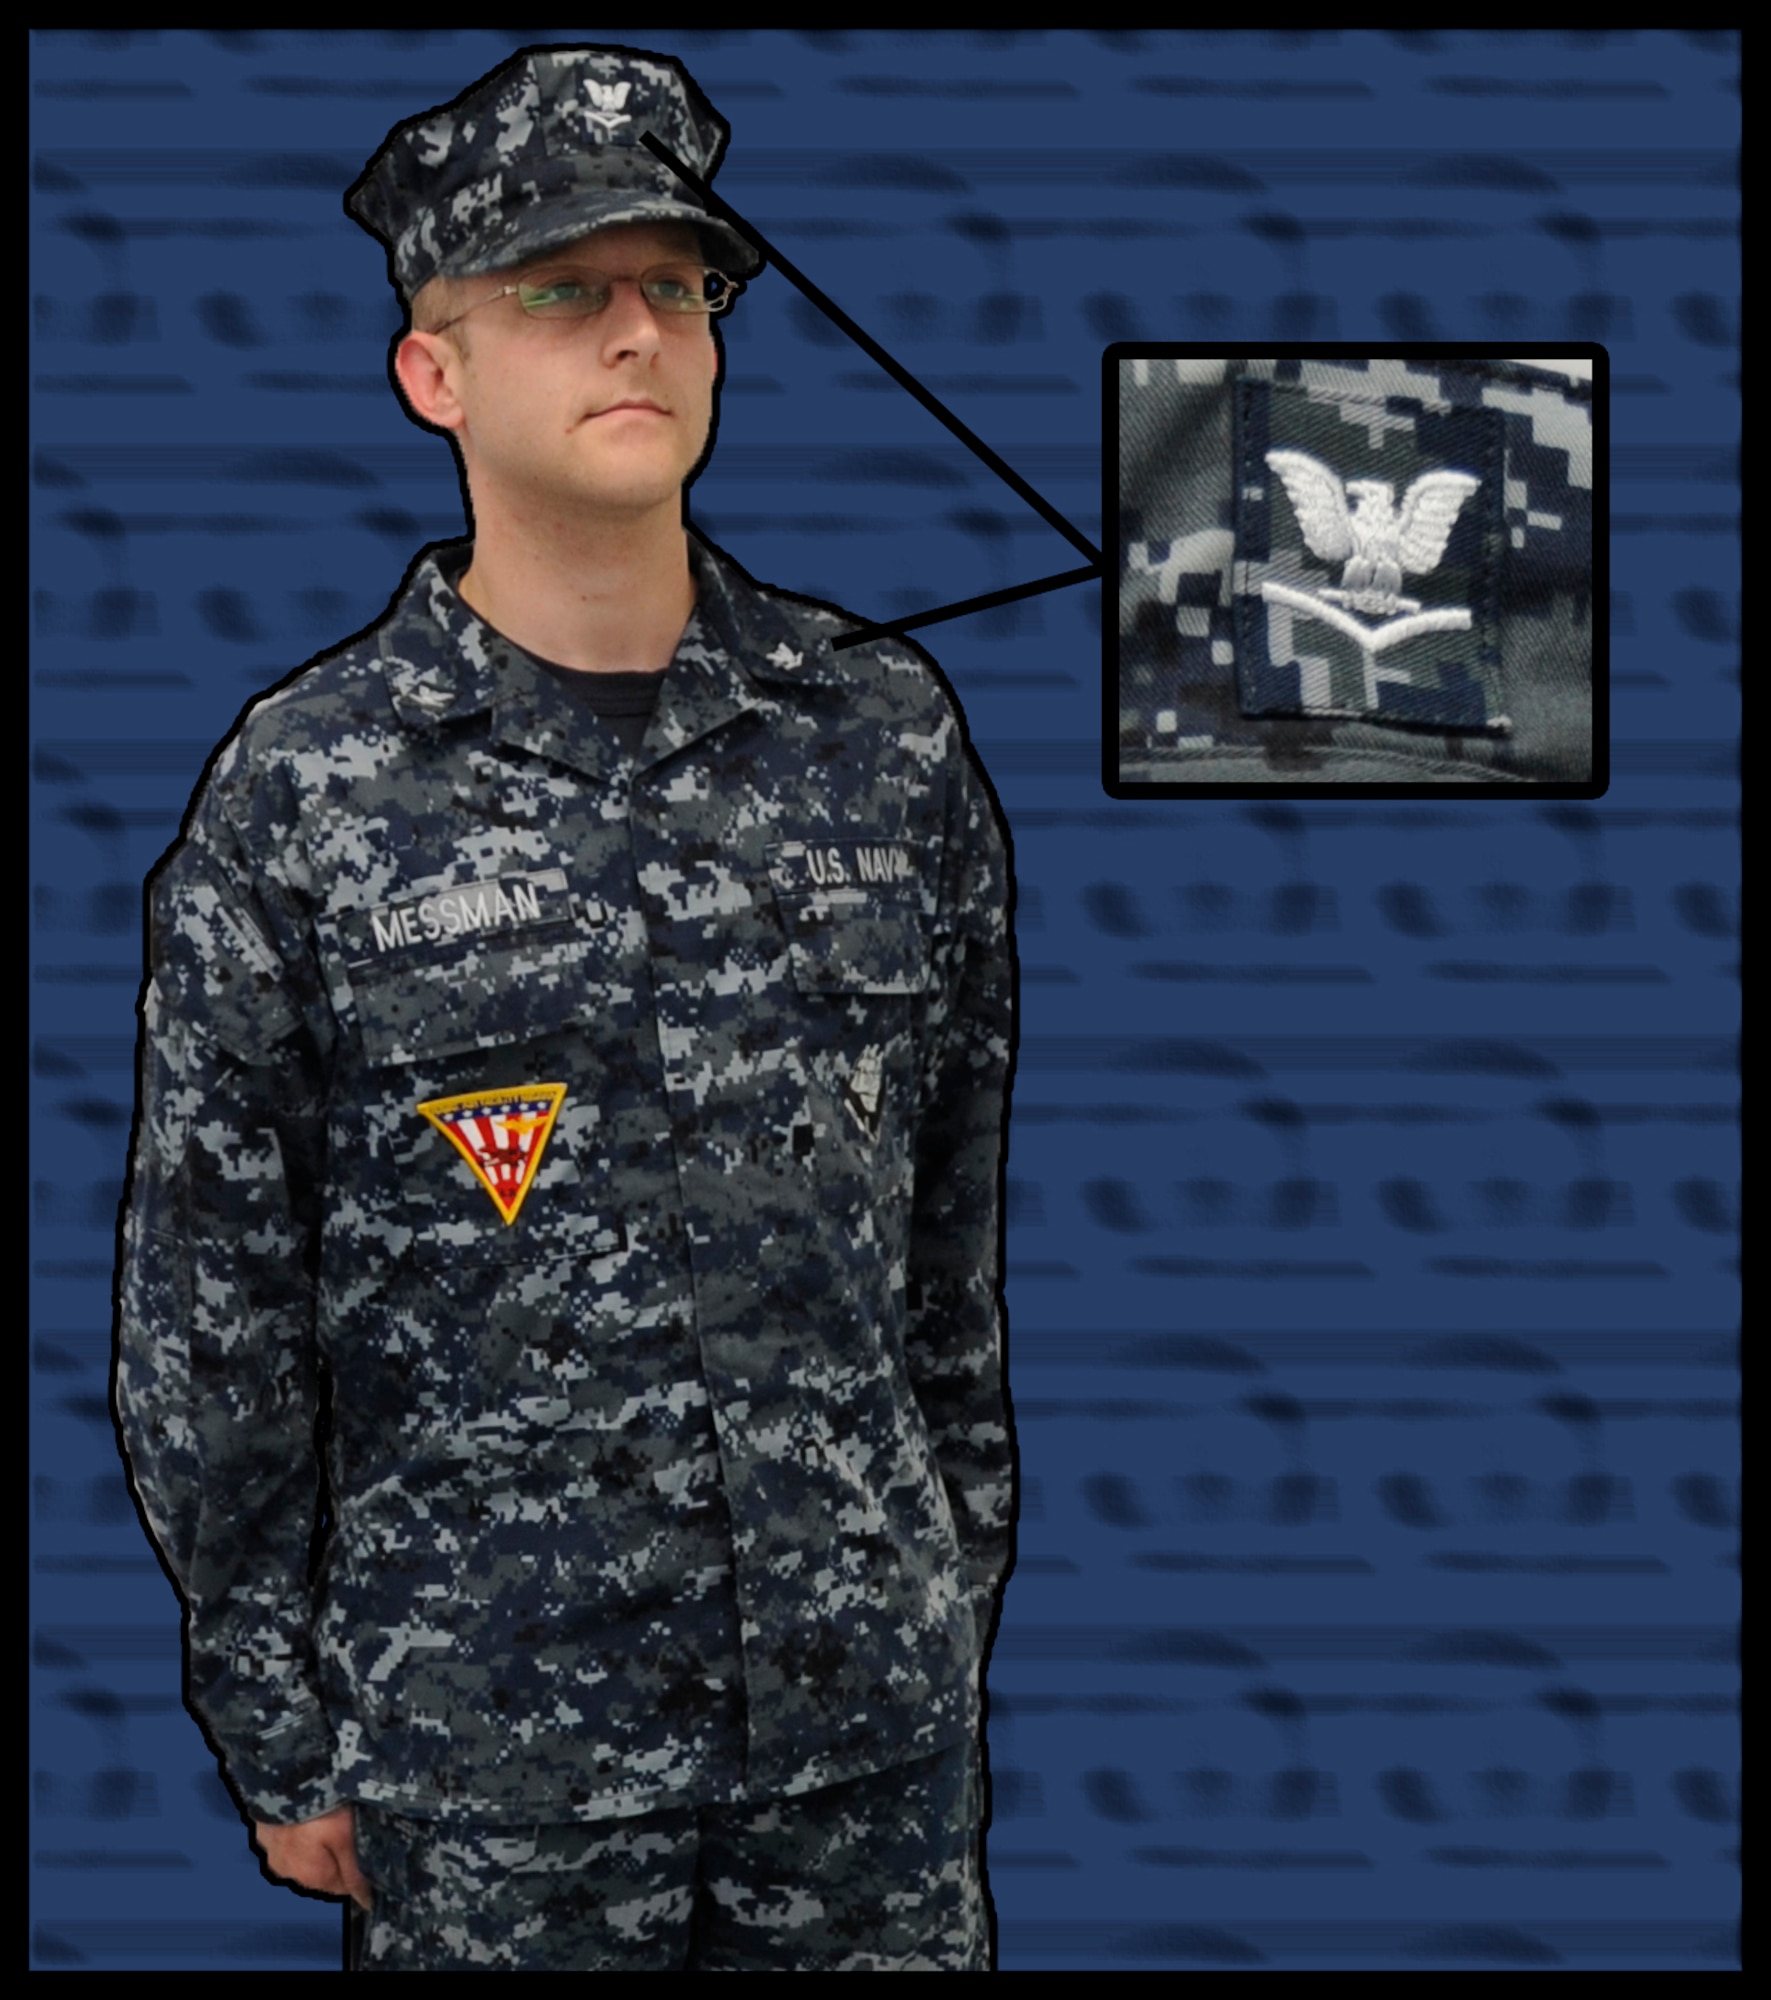 U.S. Navy Air Crewman (Avionics) 3rd Class Jack Messman, Naval Air Facility Misawa operations air crewman, displays a Navy Working Uniform Type 1 at Misawa Air Base, Japan, June 28, 2012. The insignia for NWU's are located on the front of the cap and the collar. A common mistake is saluting Navy enlisted Sailors because of the close similarities between the chevron and crow insignia worn by petty officers and the eagle insignia of the Navy Captain. (U.S. Air Force graphic by Airman 1st Class Kaleb Snay/ Released)